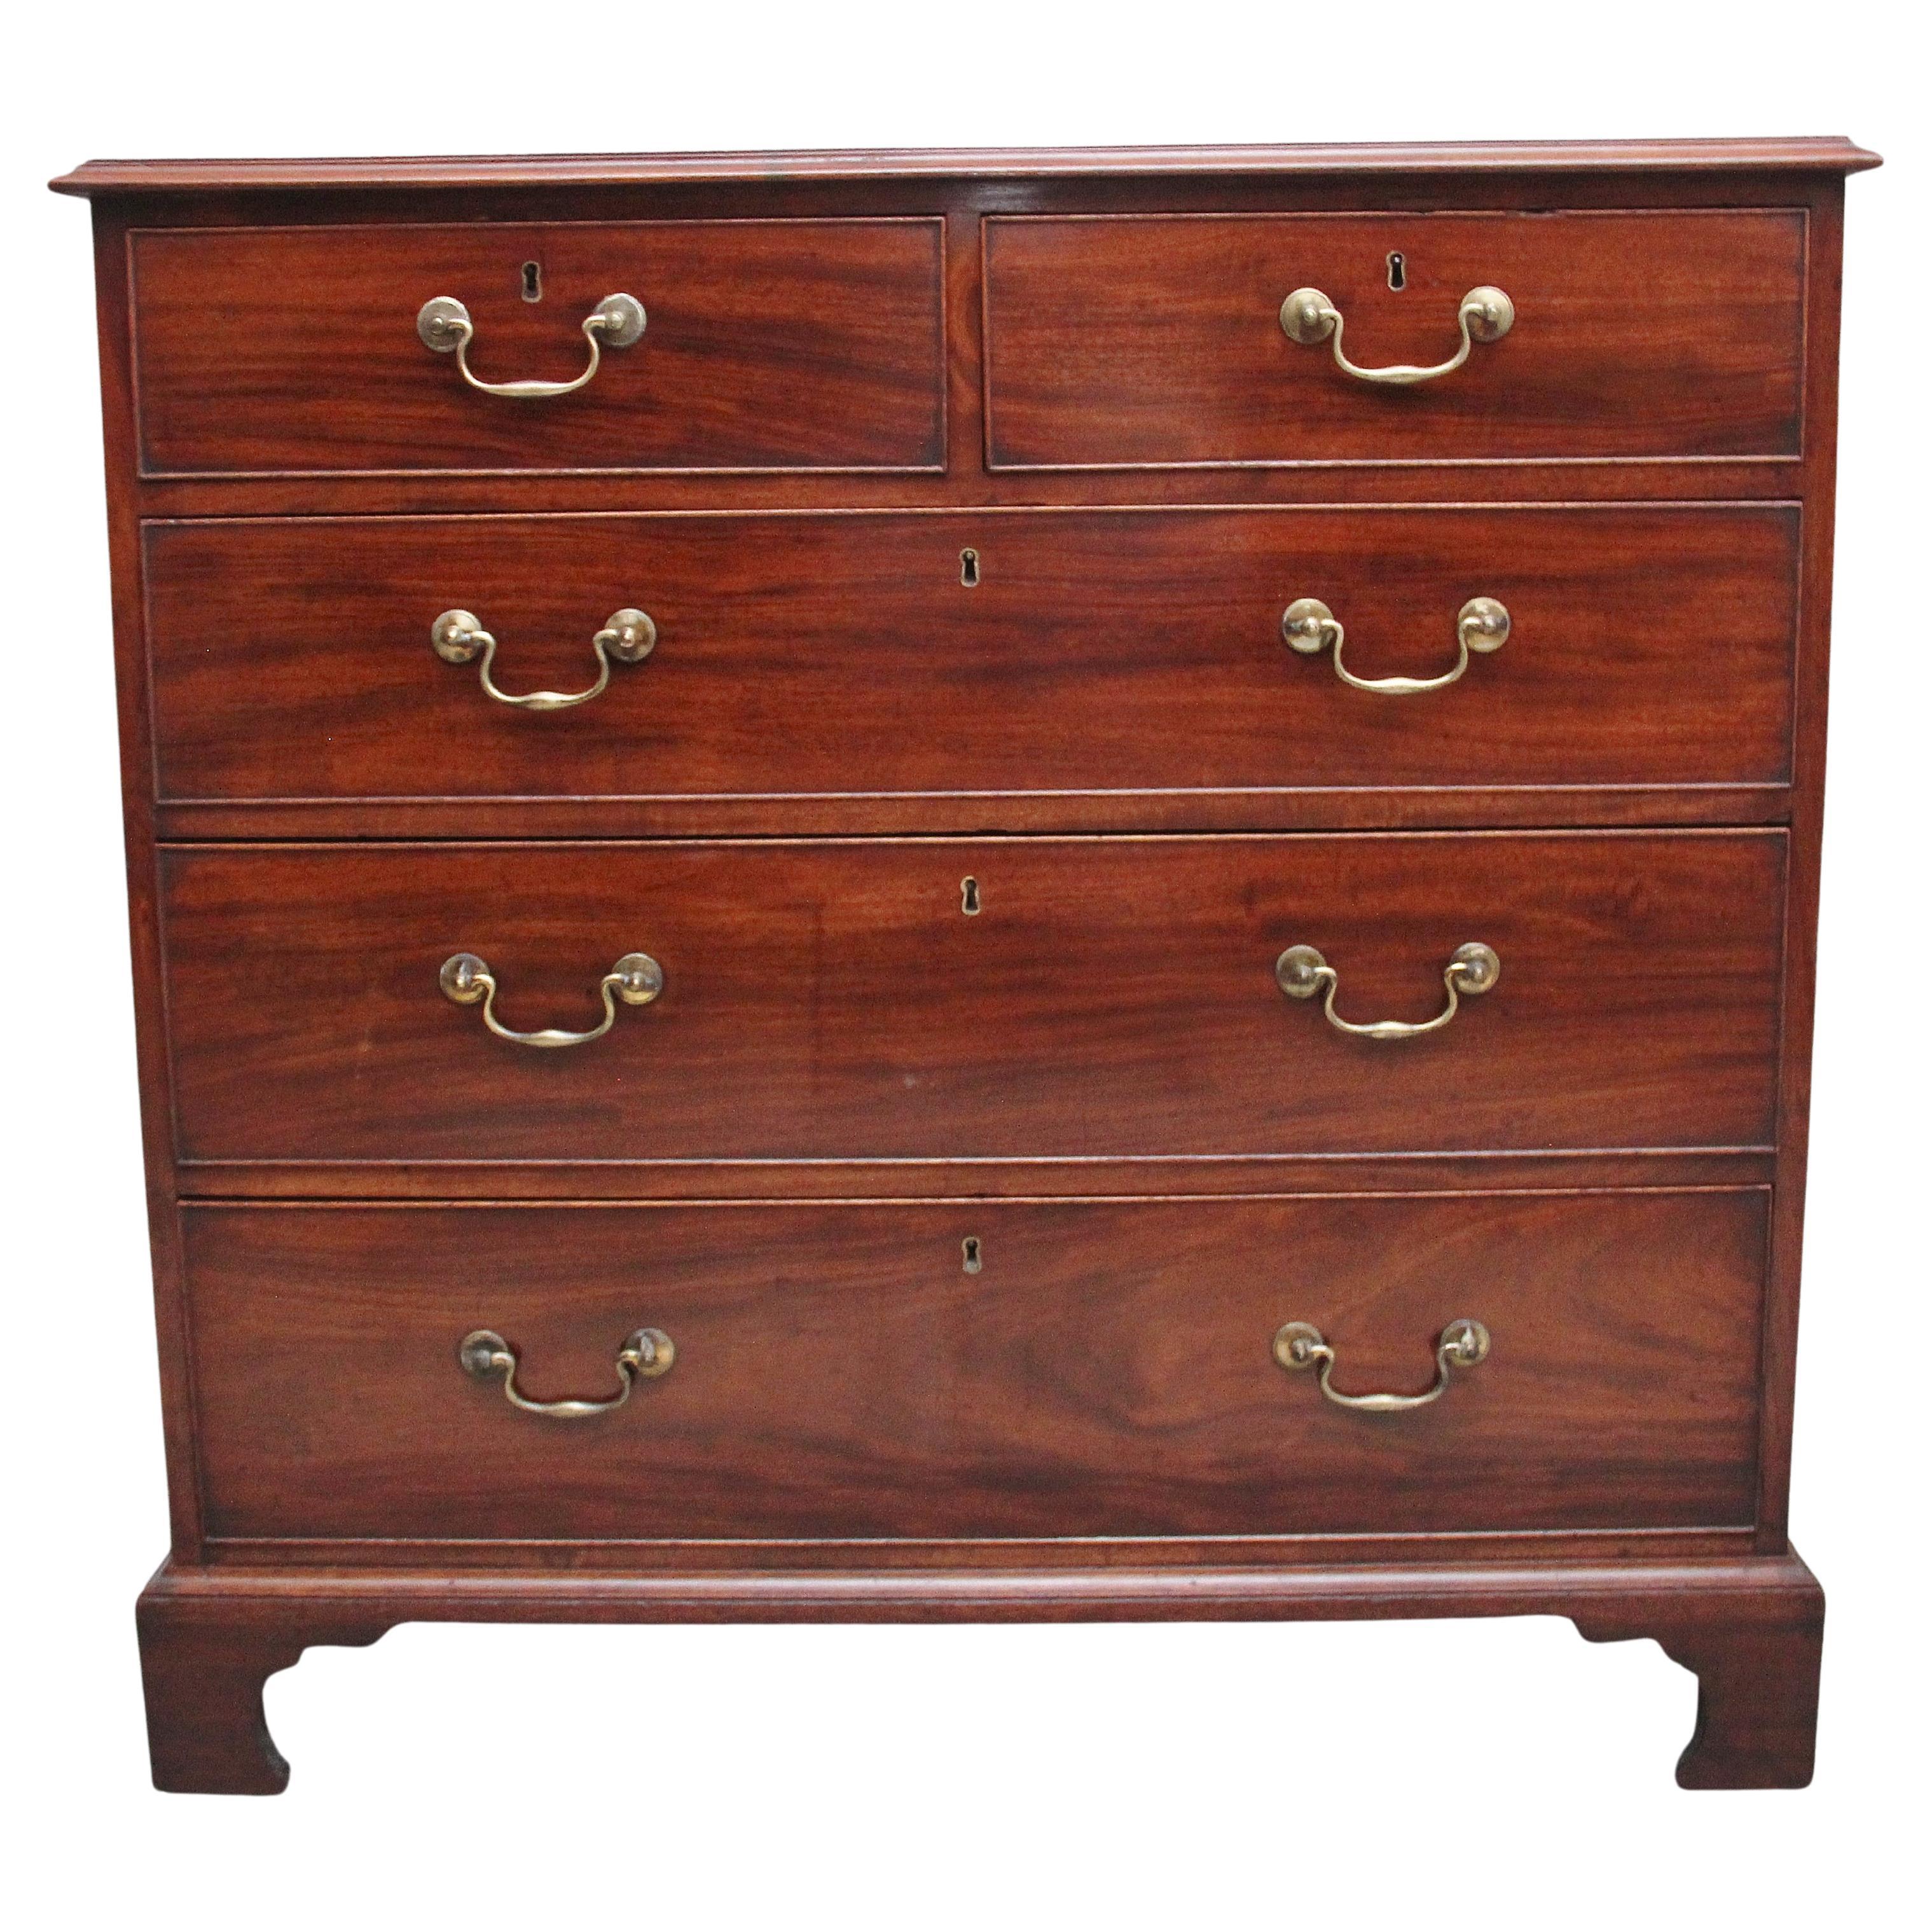 Early 19th Century flat fronted mahogany chest of drawers